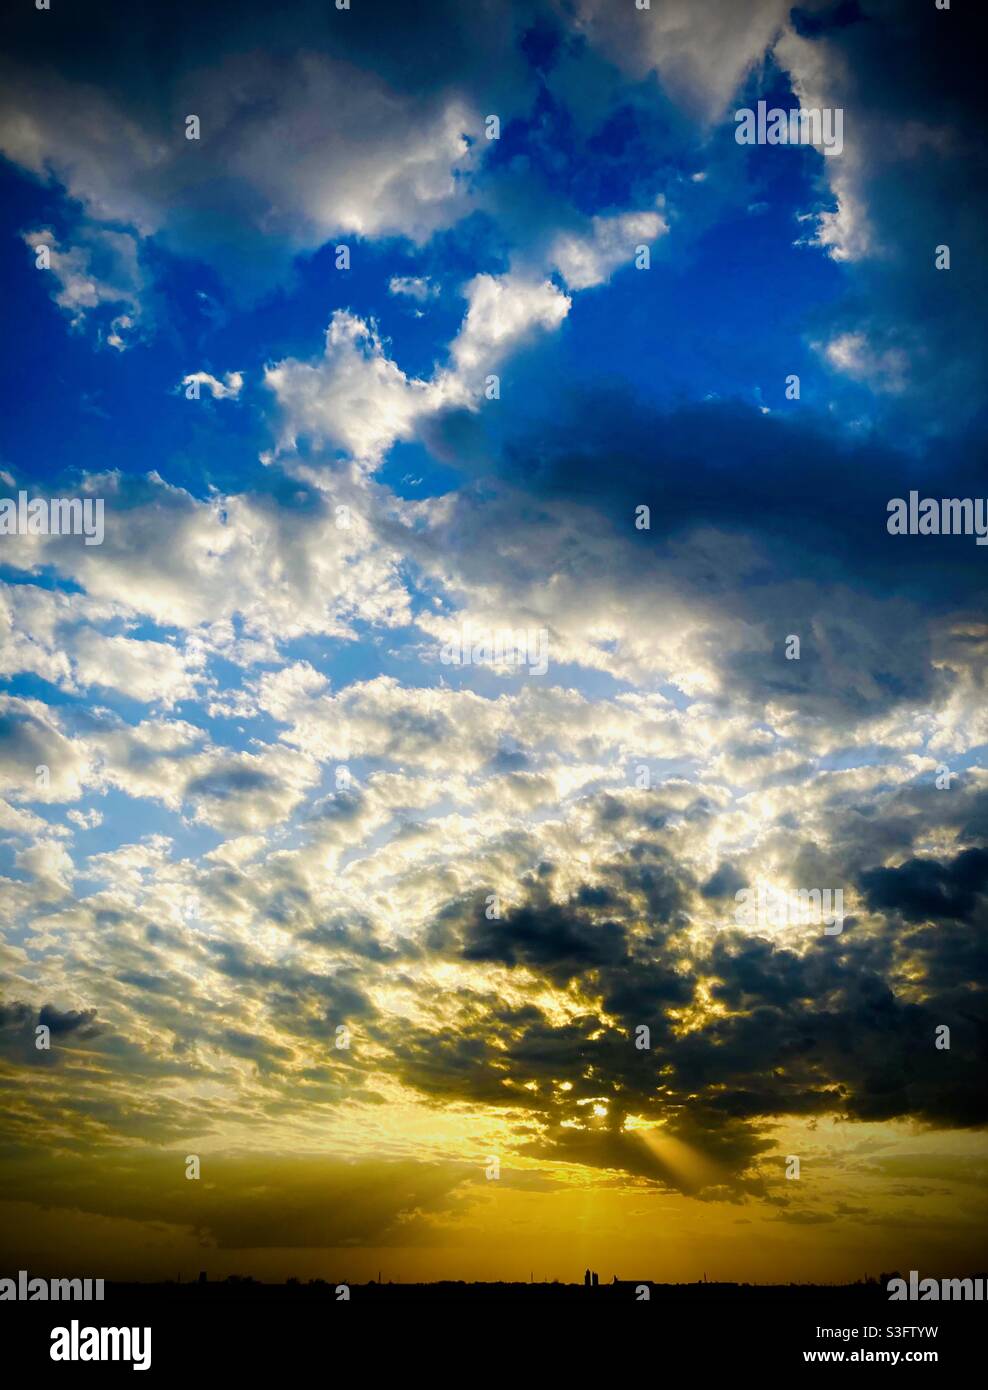 Bright golden sunset under a sky spangled with clouds, silhouetting a small city below. Stock Photo